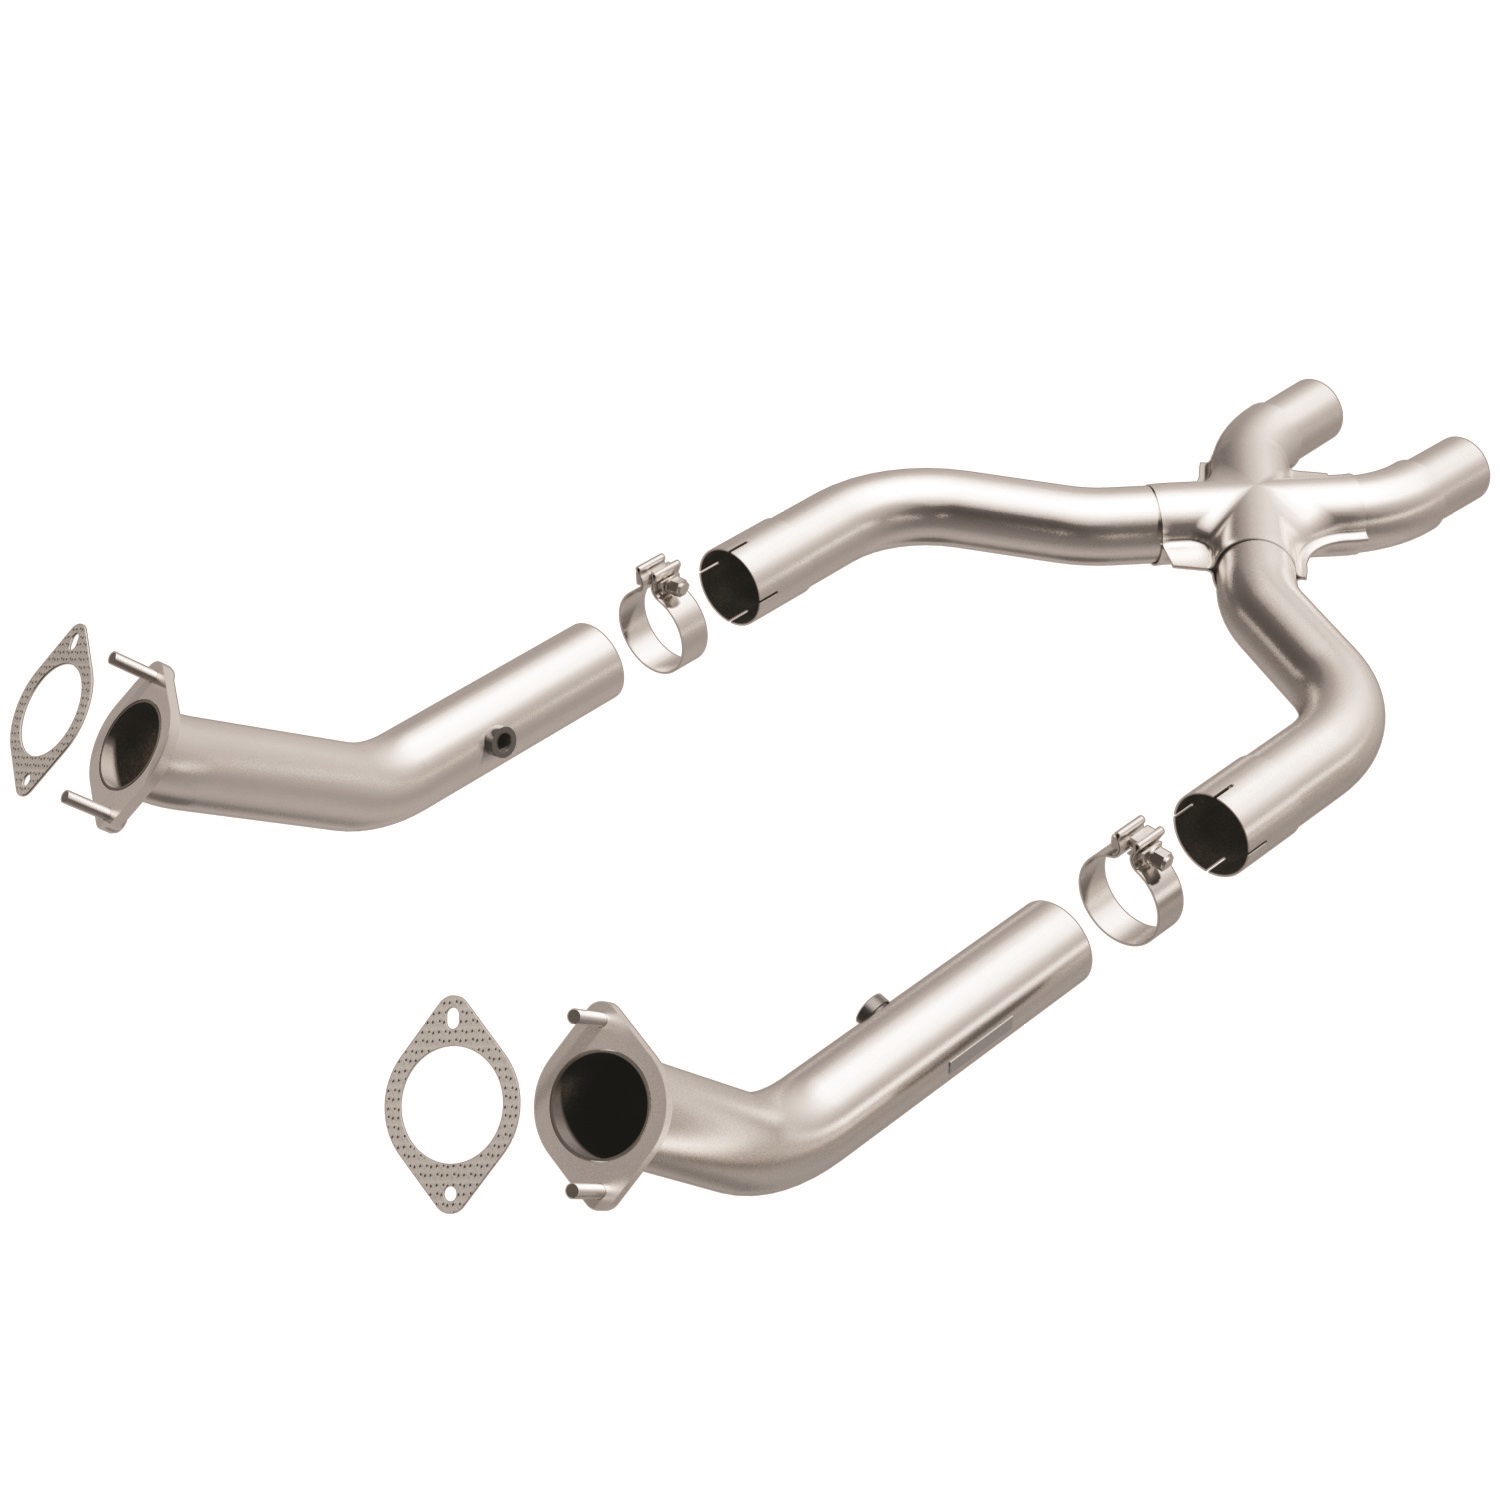 Magnaflow Performance Exhaust Magnaflow Performance Exhaust 16400 Direct Fit Off-Road Pipes 11-14 Mustang